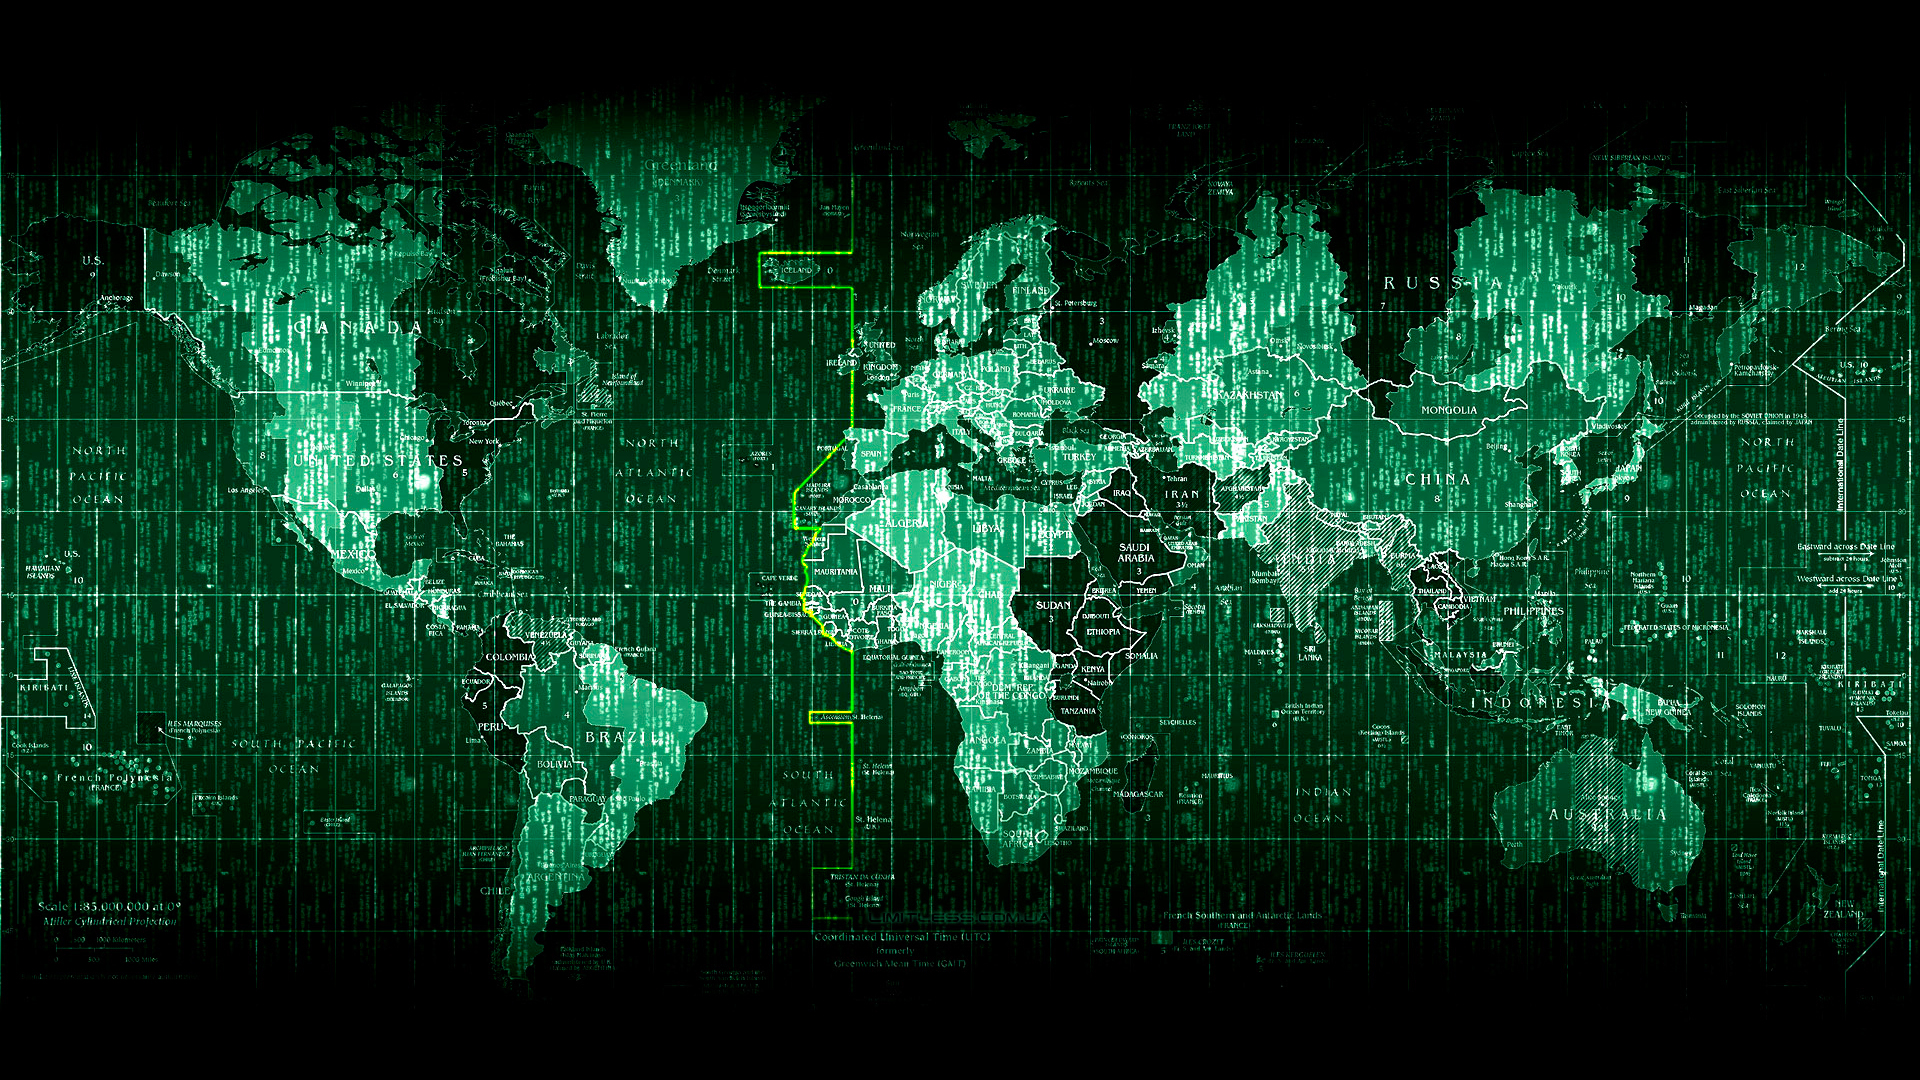 Free Download World Map 19x1080 For Your Desktop Mobile Tablet Explore 49 Cia Live Wallpaper Cia Logo Wallpaper Fbi Terminal Wallpaper Cia Wallpaper Hd